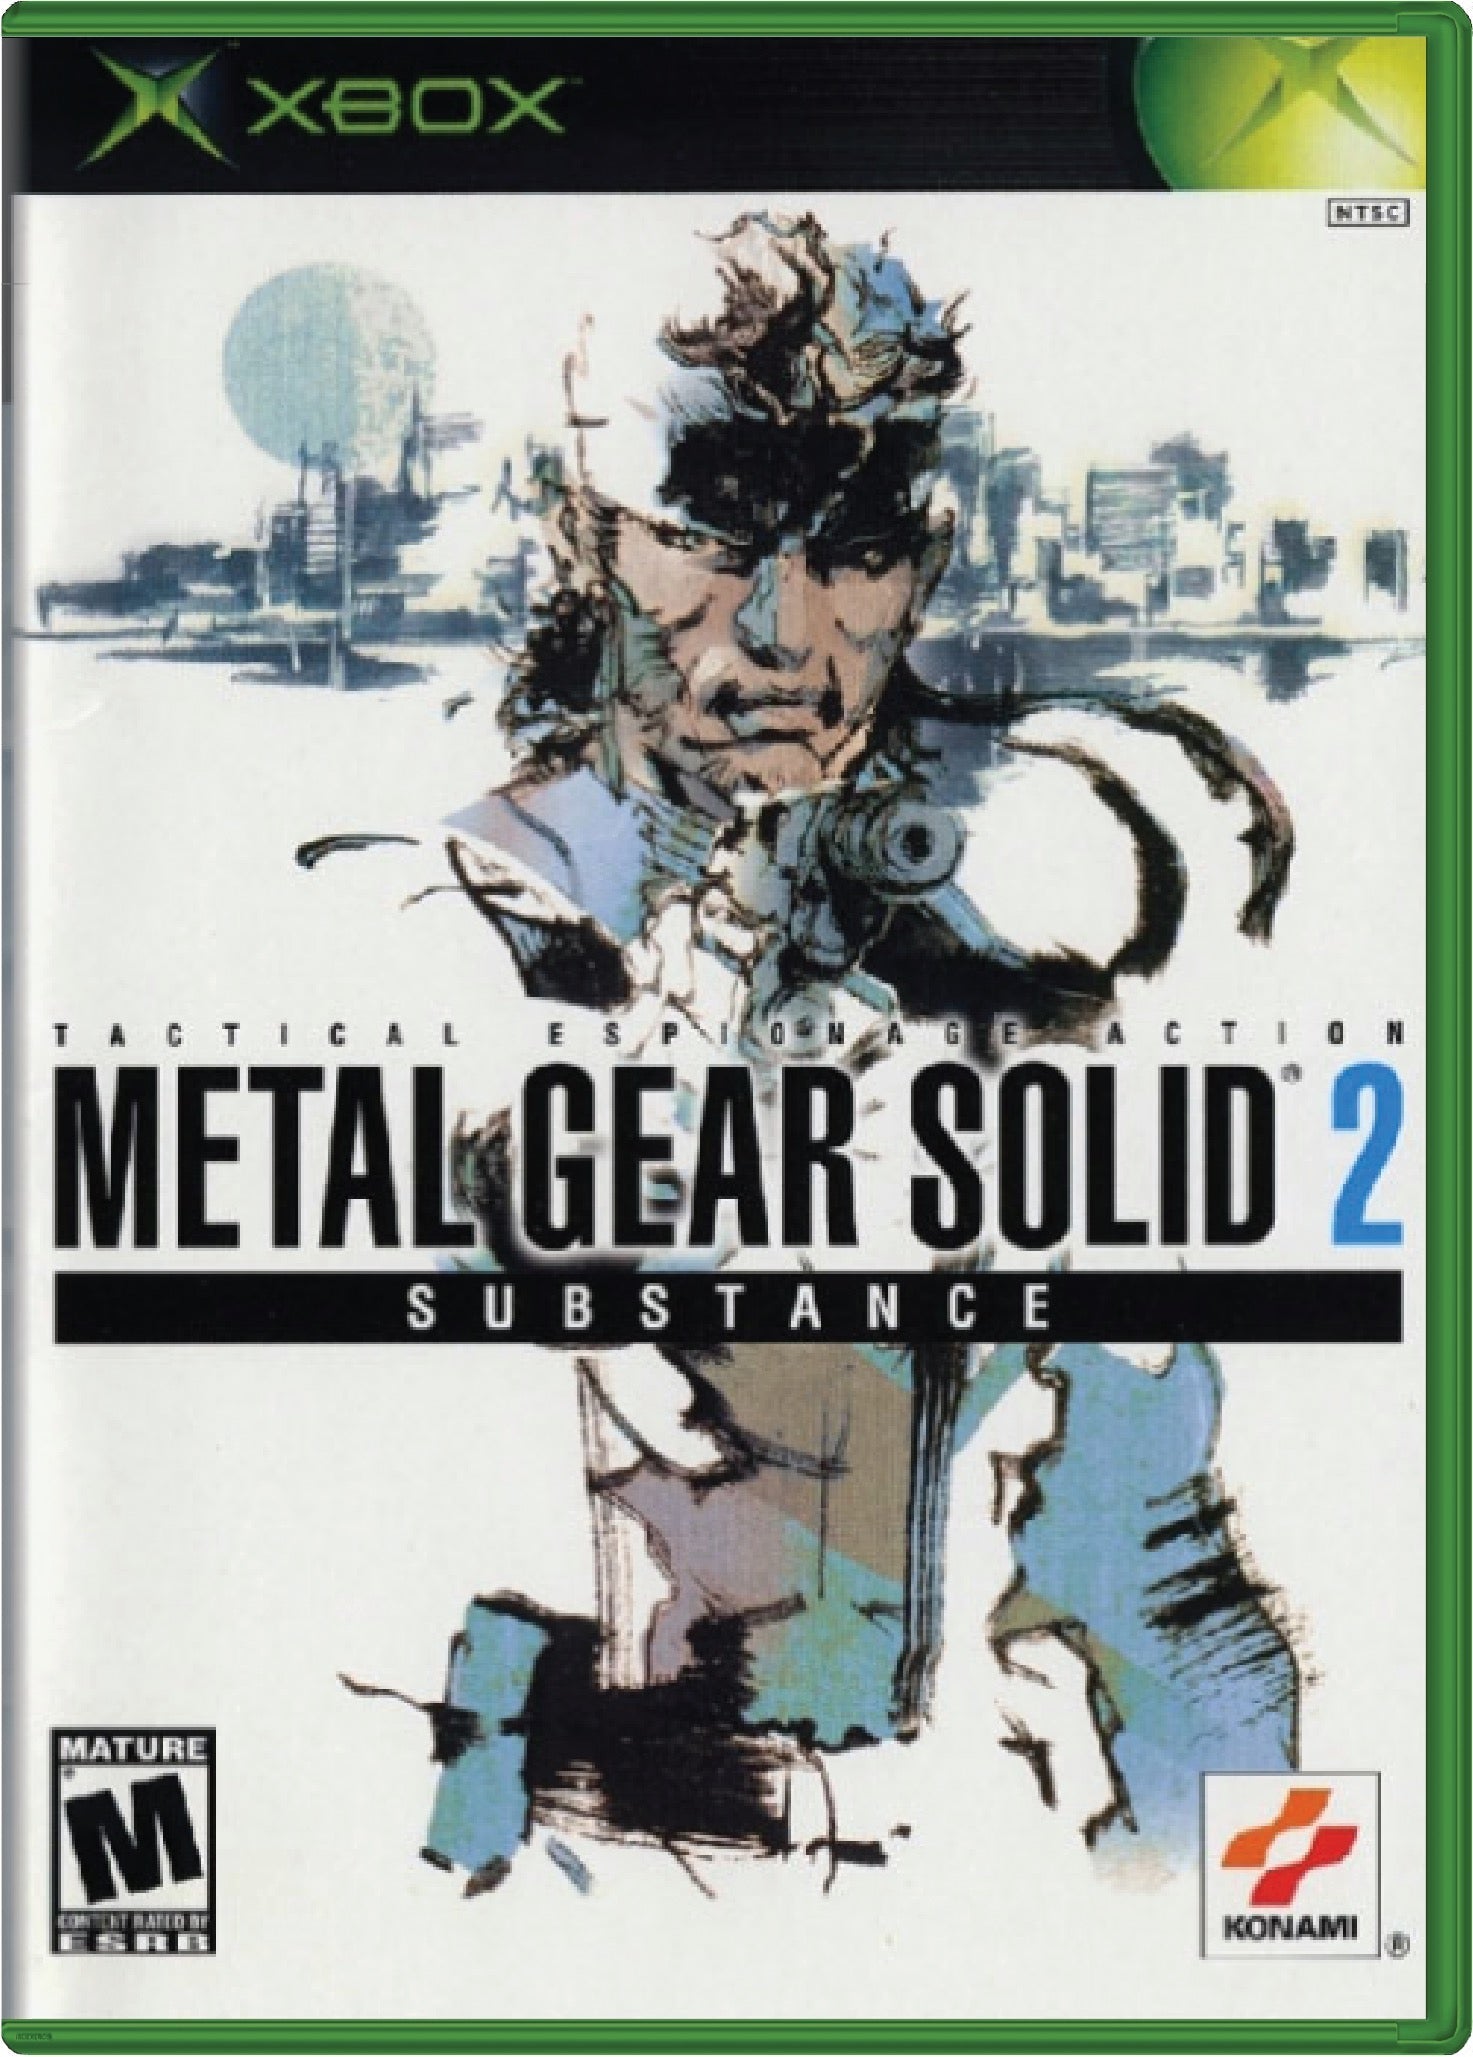 Metal Gear Solid 2 Substance Cover Art